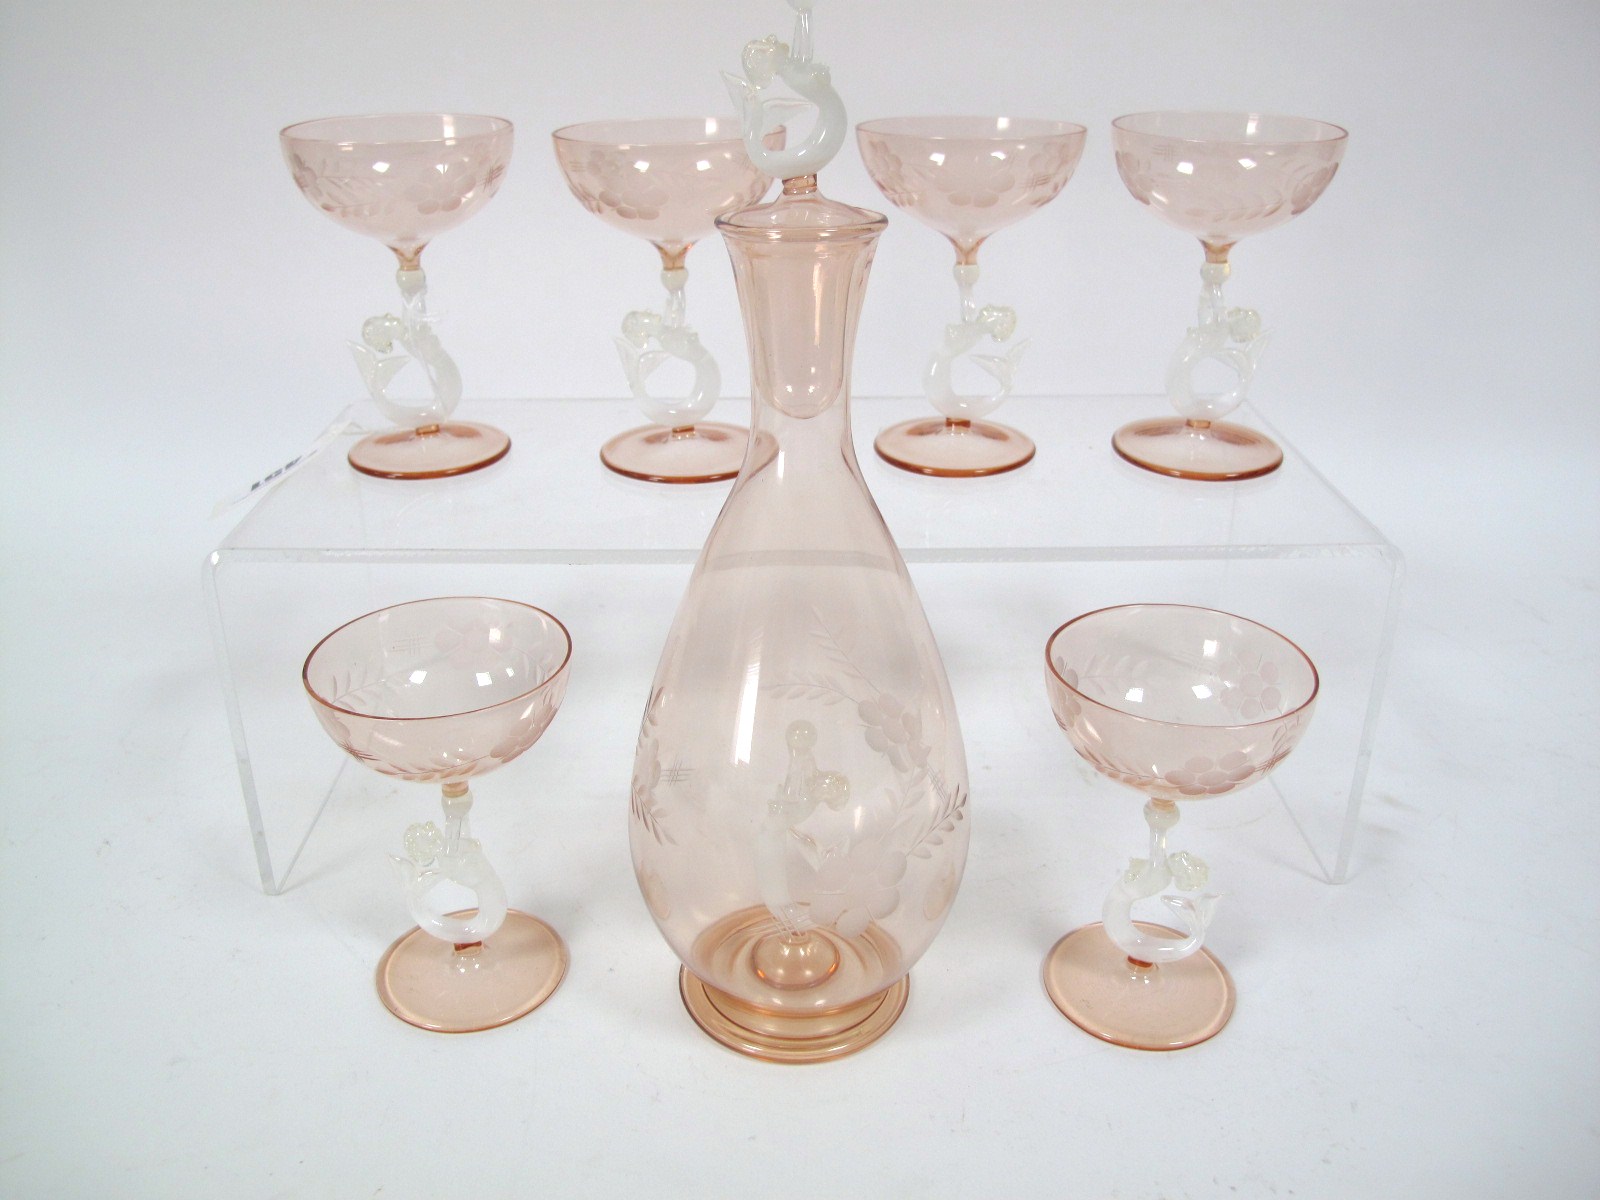 A Mid XX Century Vintage Bimini Werkstatte Cocktail Set, in pale pink, the footed baluster